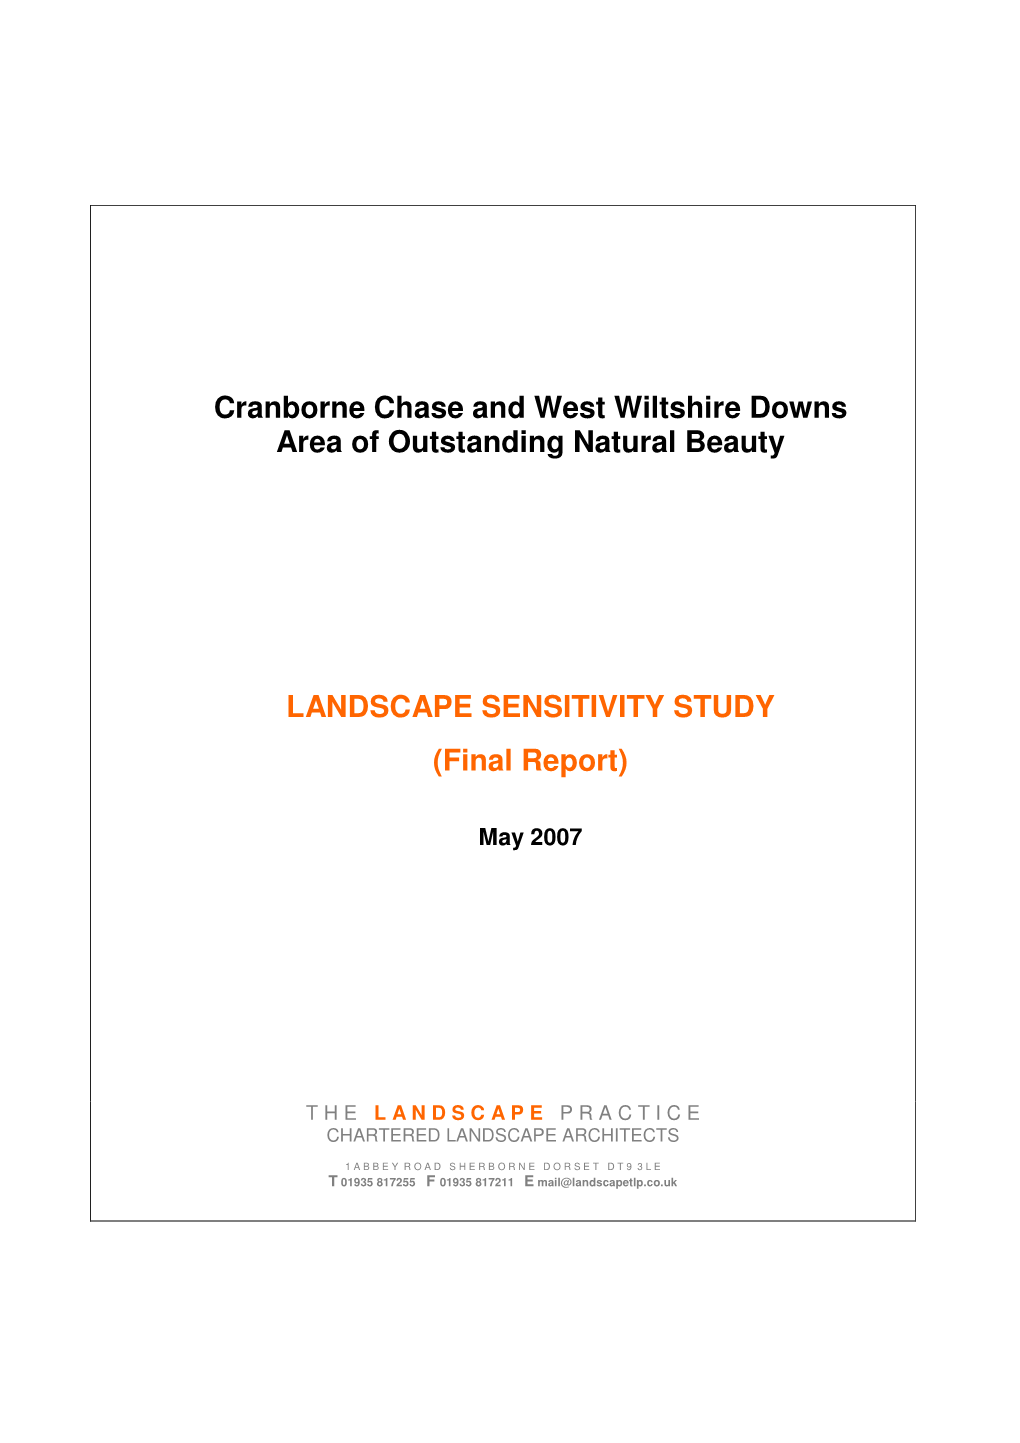 Cranborne Chase and West Wiltshire Downs Area of Outstanding Natural Beauty LANDSCAPE SENSITIVITY STUDY (Final Report)